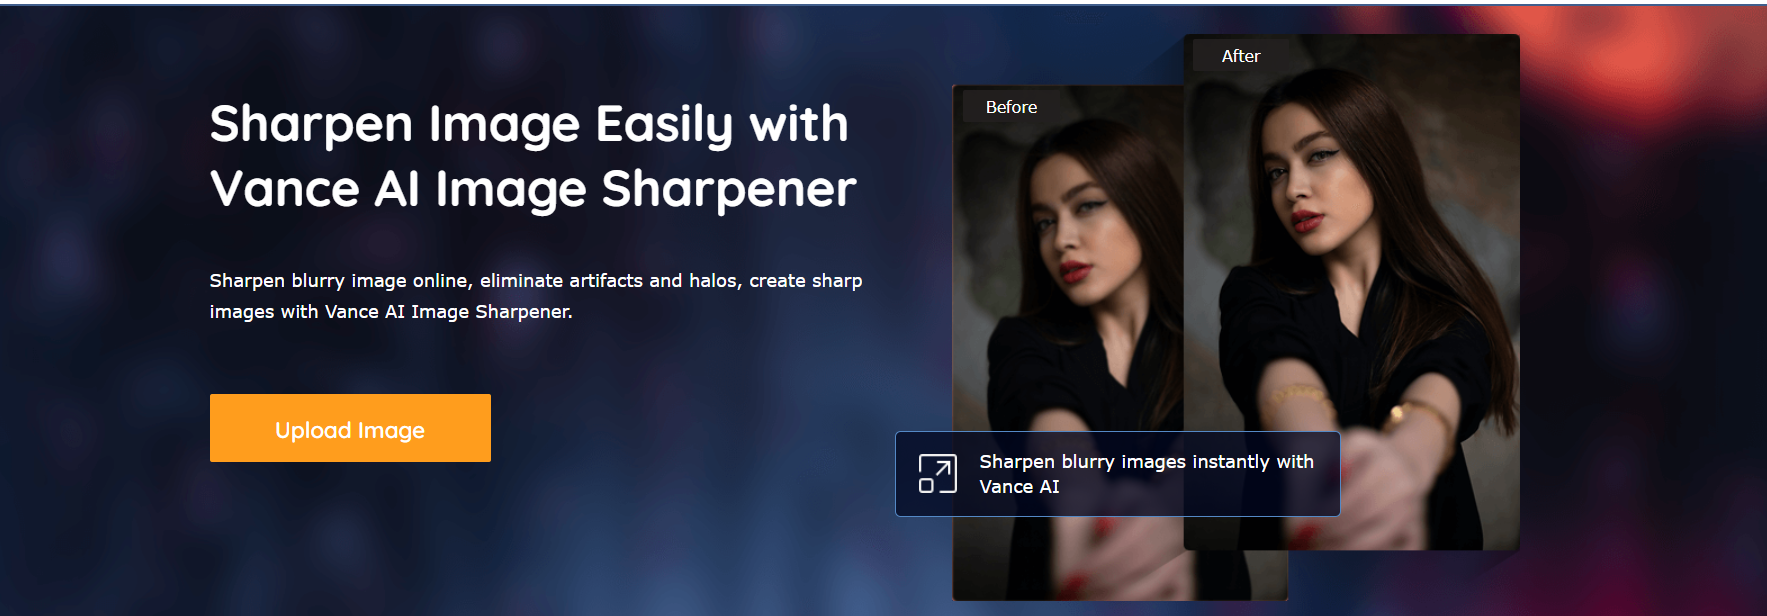 How to sharpen image online with Vance AI Image Sharpener?